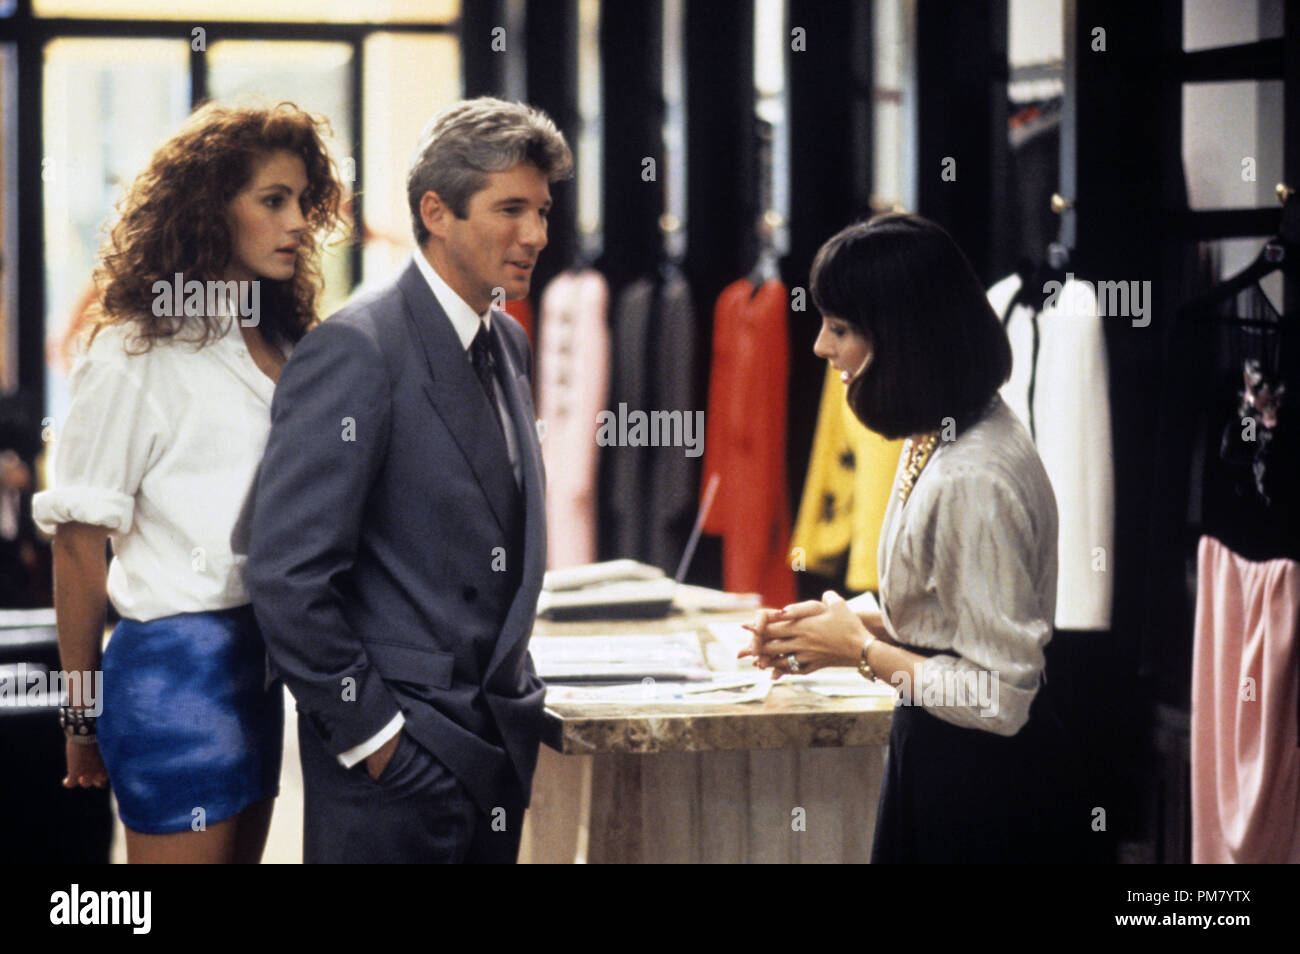 Film still or Publicity still from 'Pretty Woman' Richard Gere and Julia Roberts © 1990 Touchstone All Rights Reserved   File Reference # 31571128THA  For Editorial Use Only Stock Photo